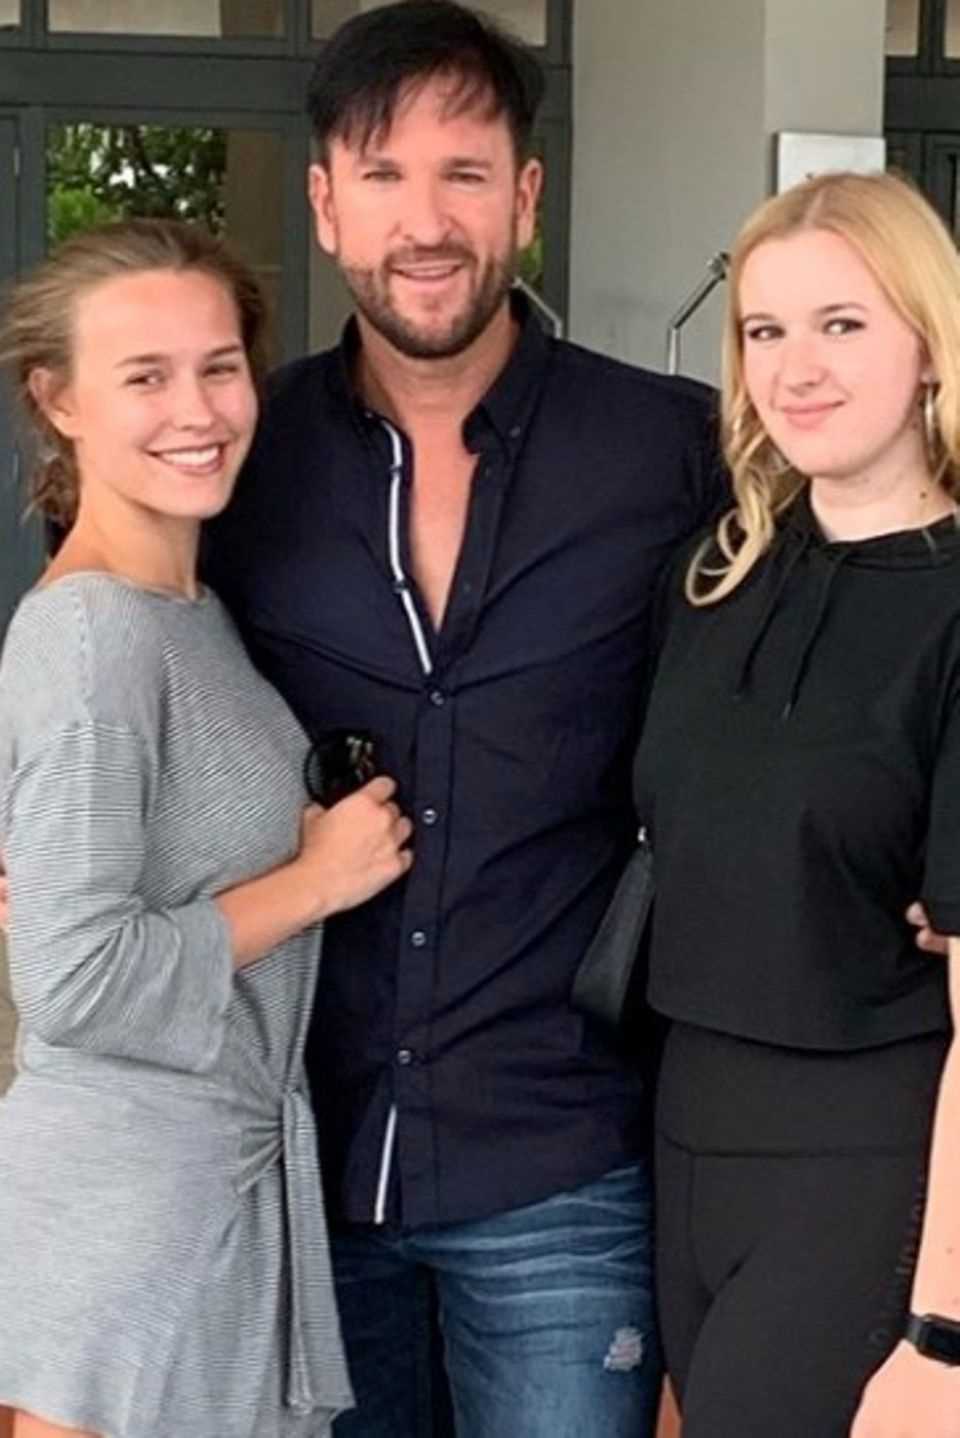 Michael Wendler with his daughter Adeline Norberg and his girlfriend Laura Müller